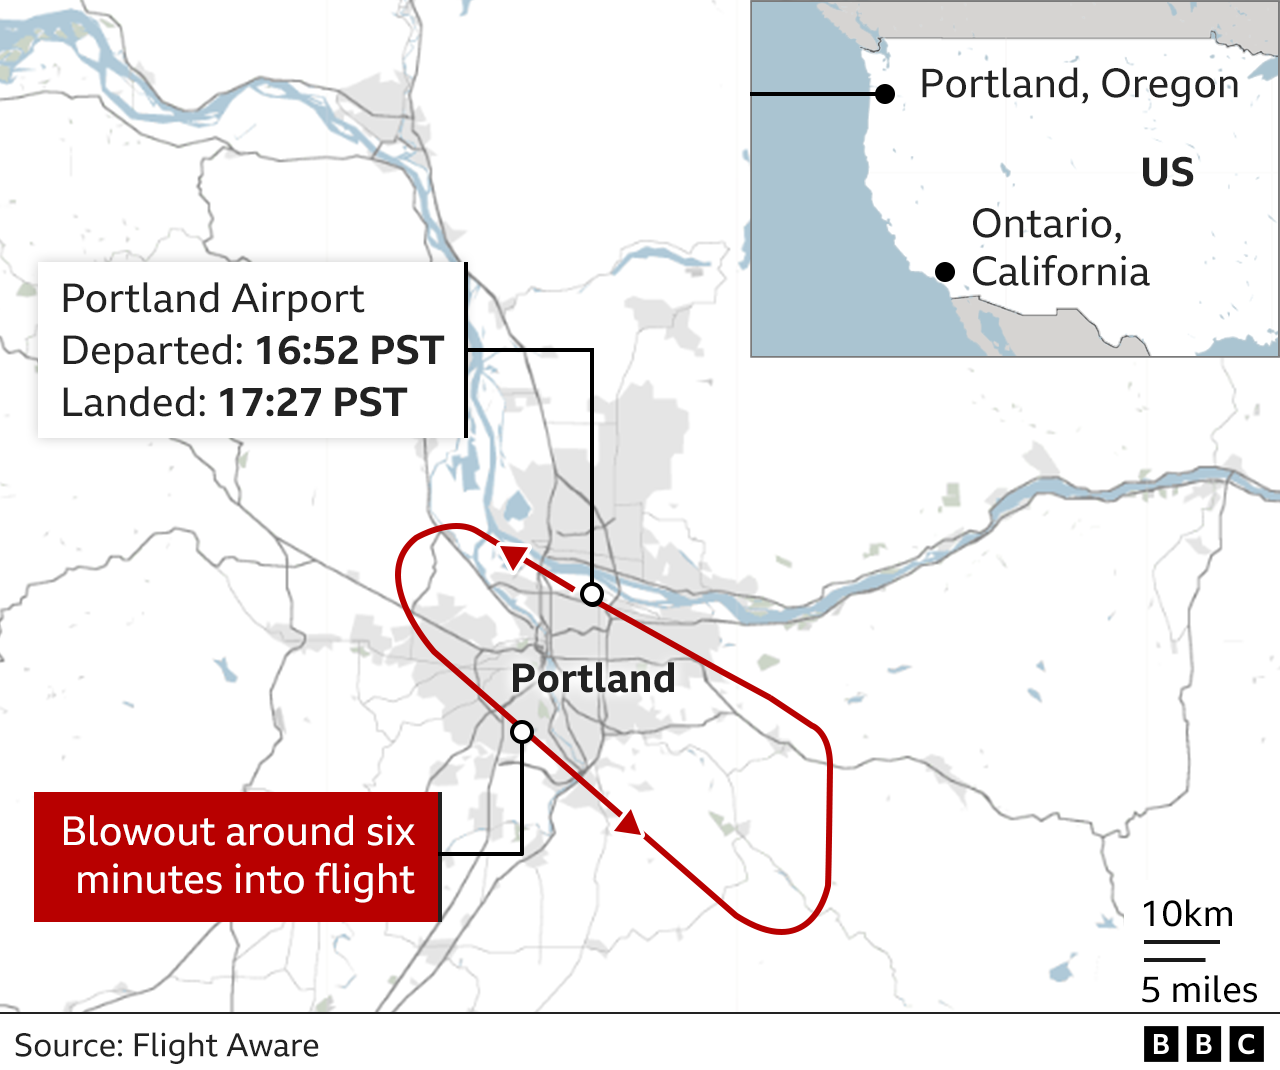 A BBC map showing the flight path of the affected Alaska Airlines flight from Portland to Ontario